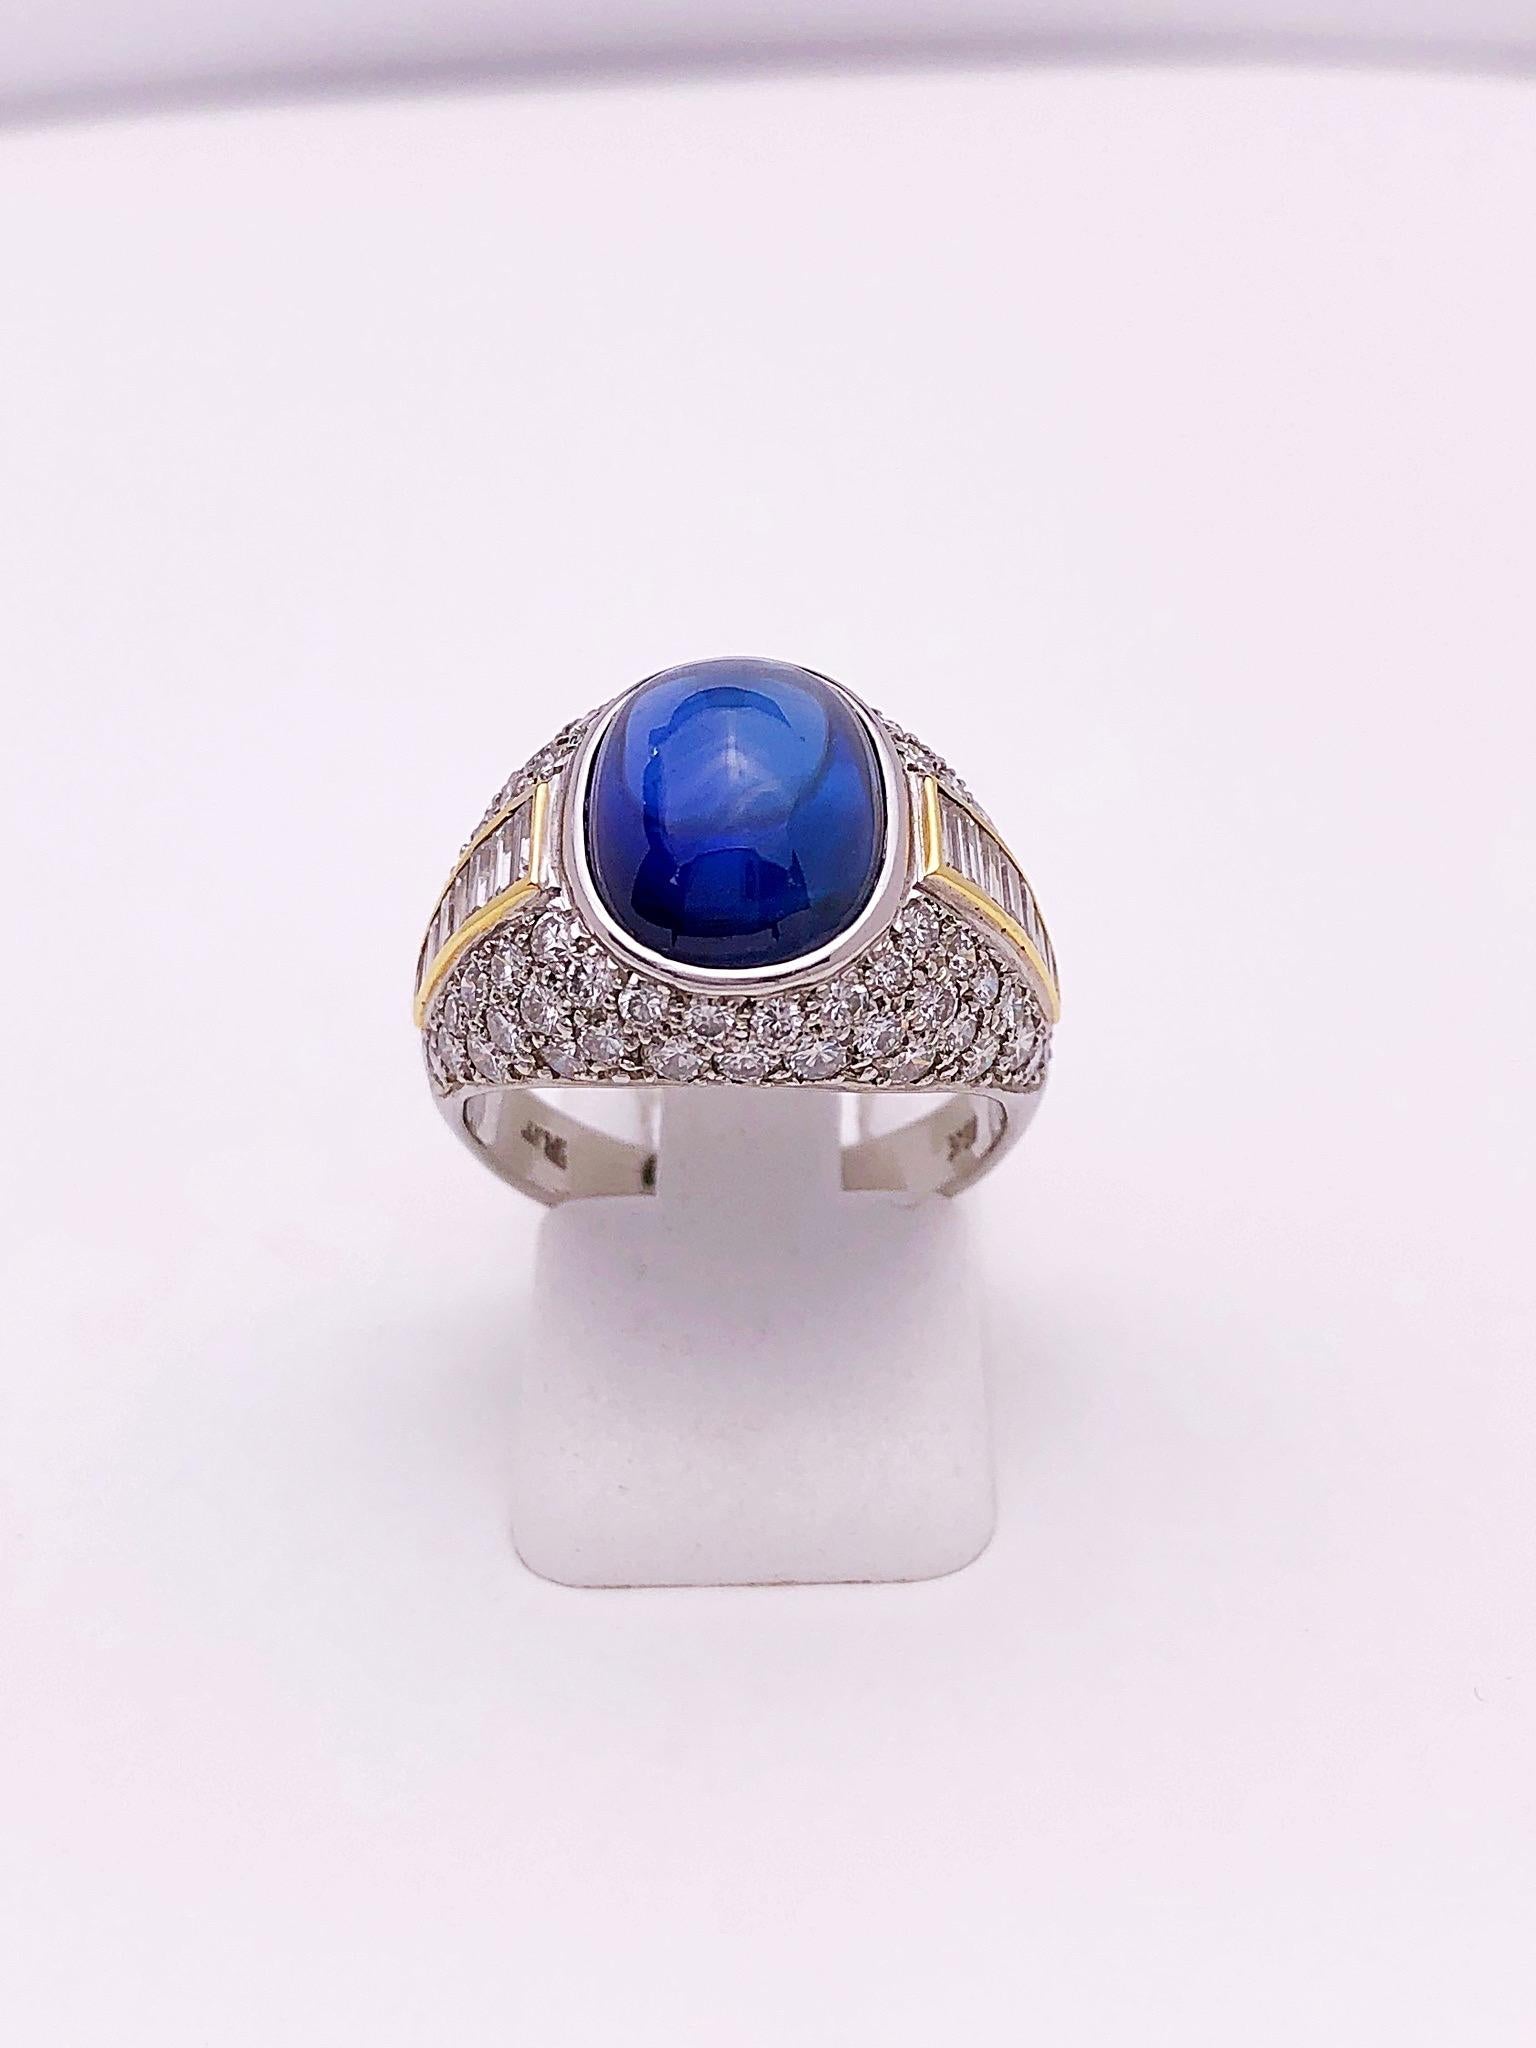 A lovely classic style platinum ring centering a 6.84 carat oval cabochon blue sapphire. This domed ring is pave set with round brilliant diamonds . A single row of diamond baguettes set in 18 karat yellow gold accent the center of the ring. Total